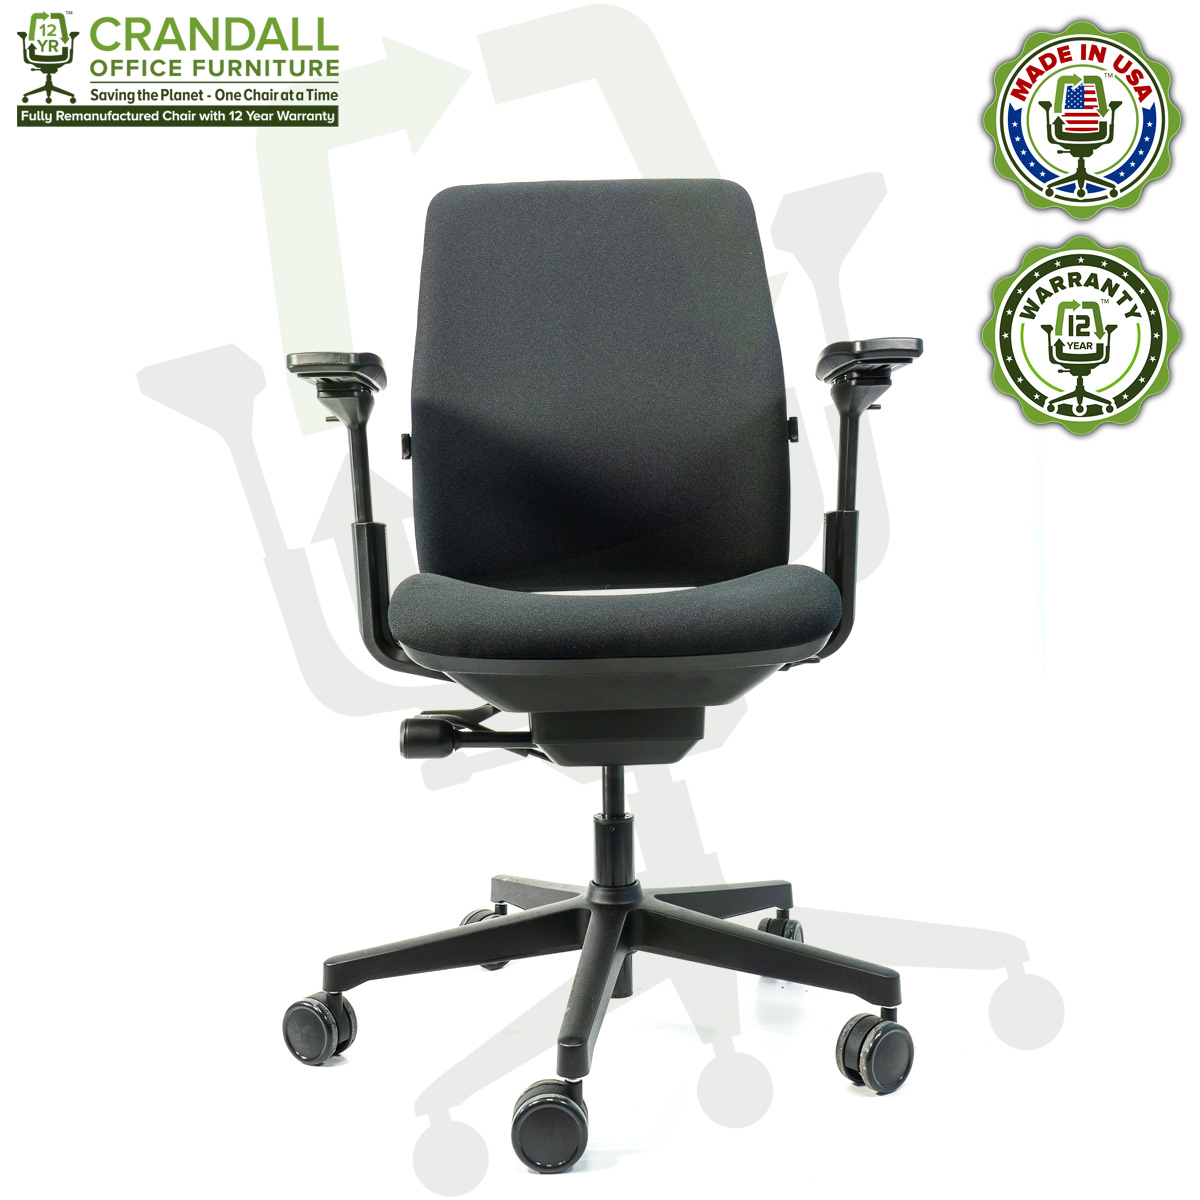 Remanufactured Steelcase 482 Amia Office Chair Crandall Office